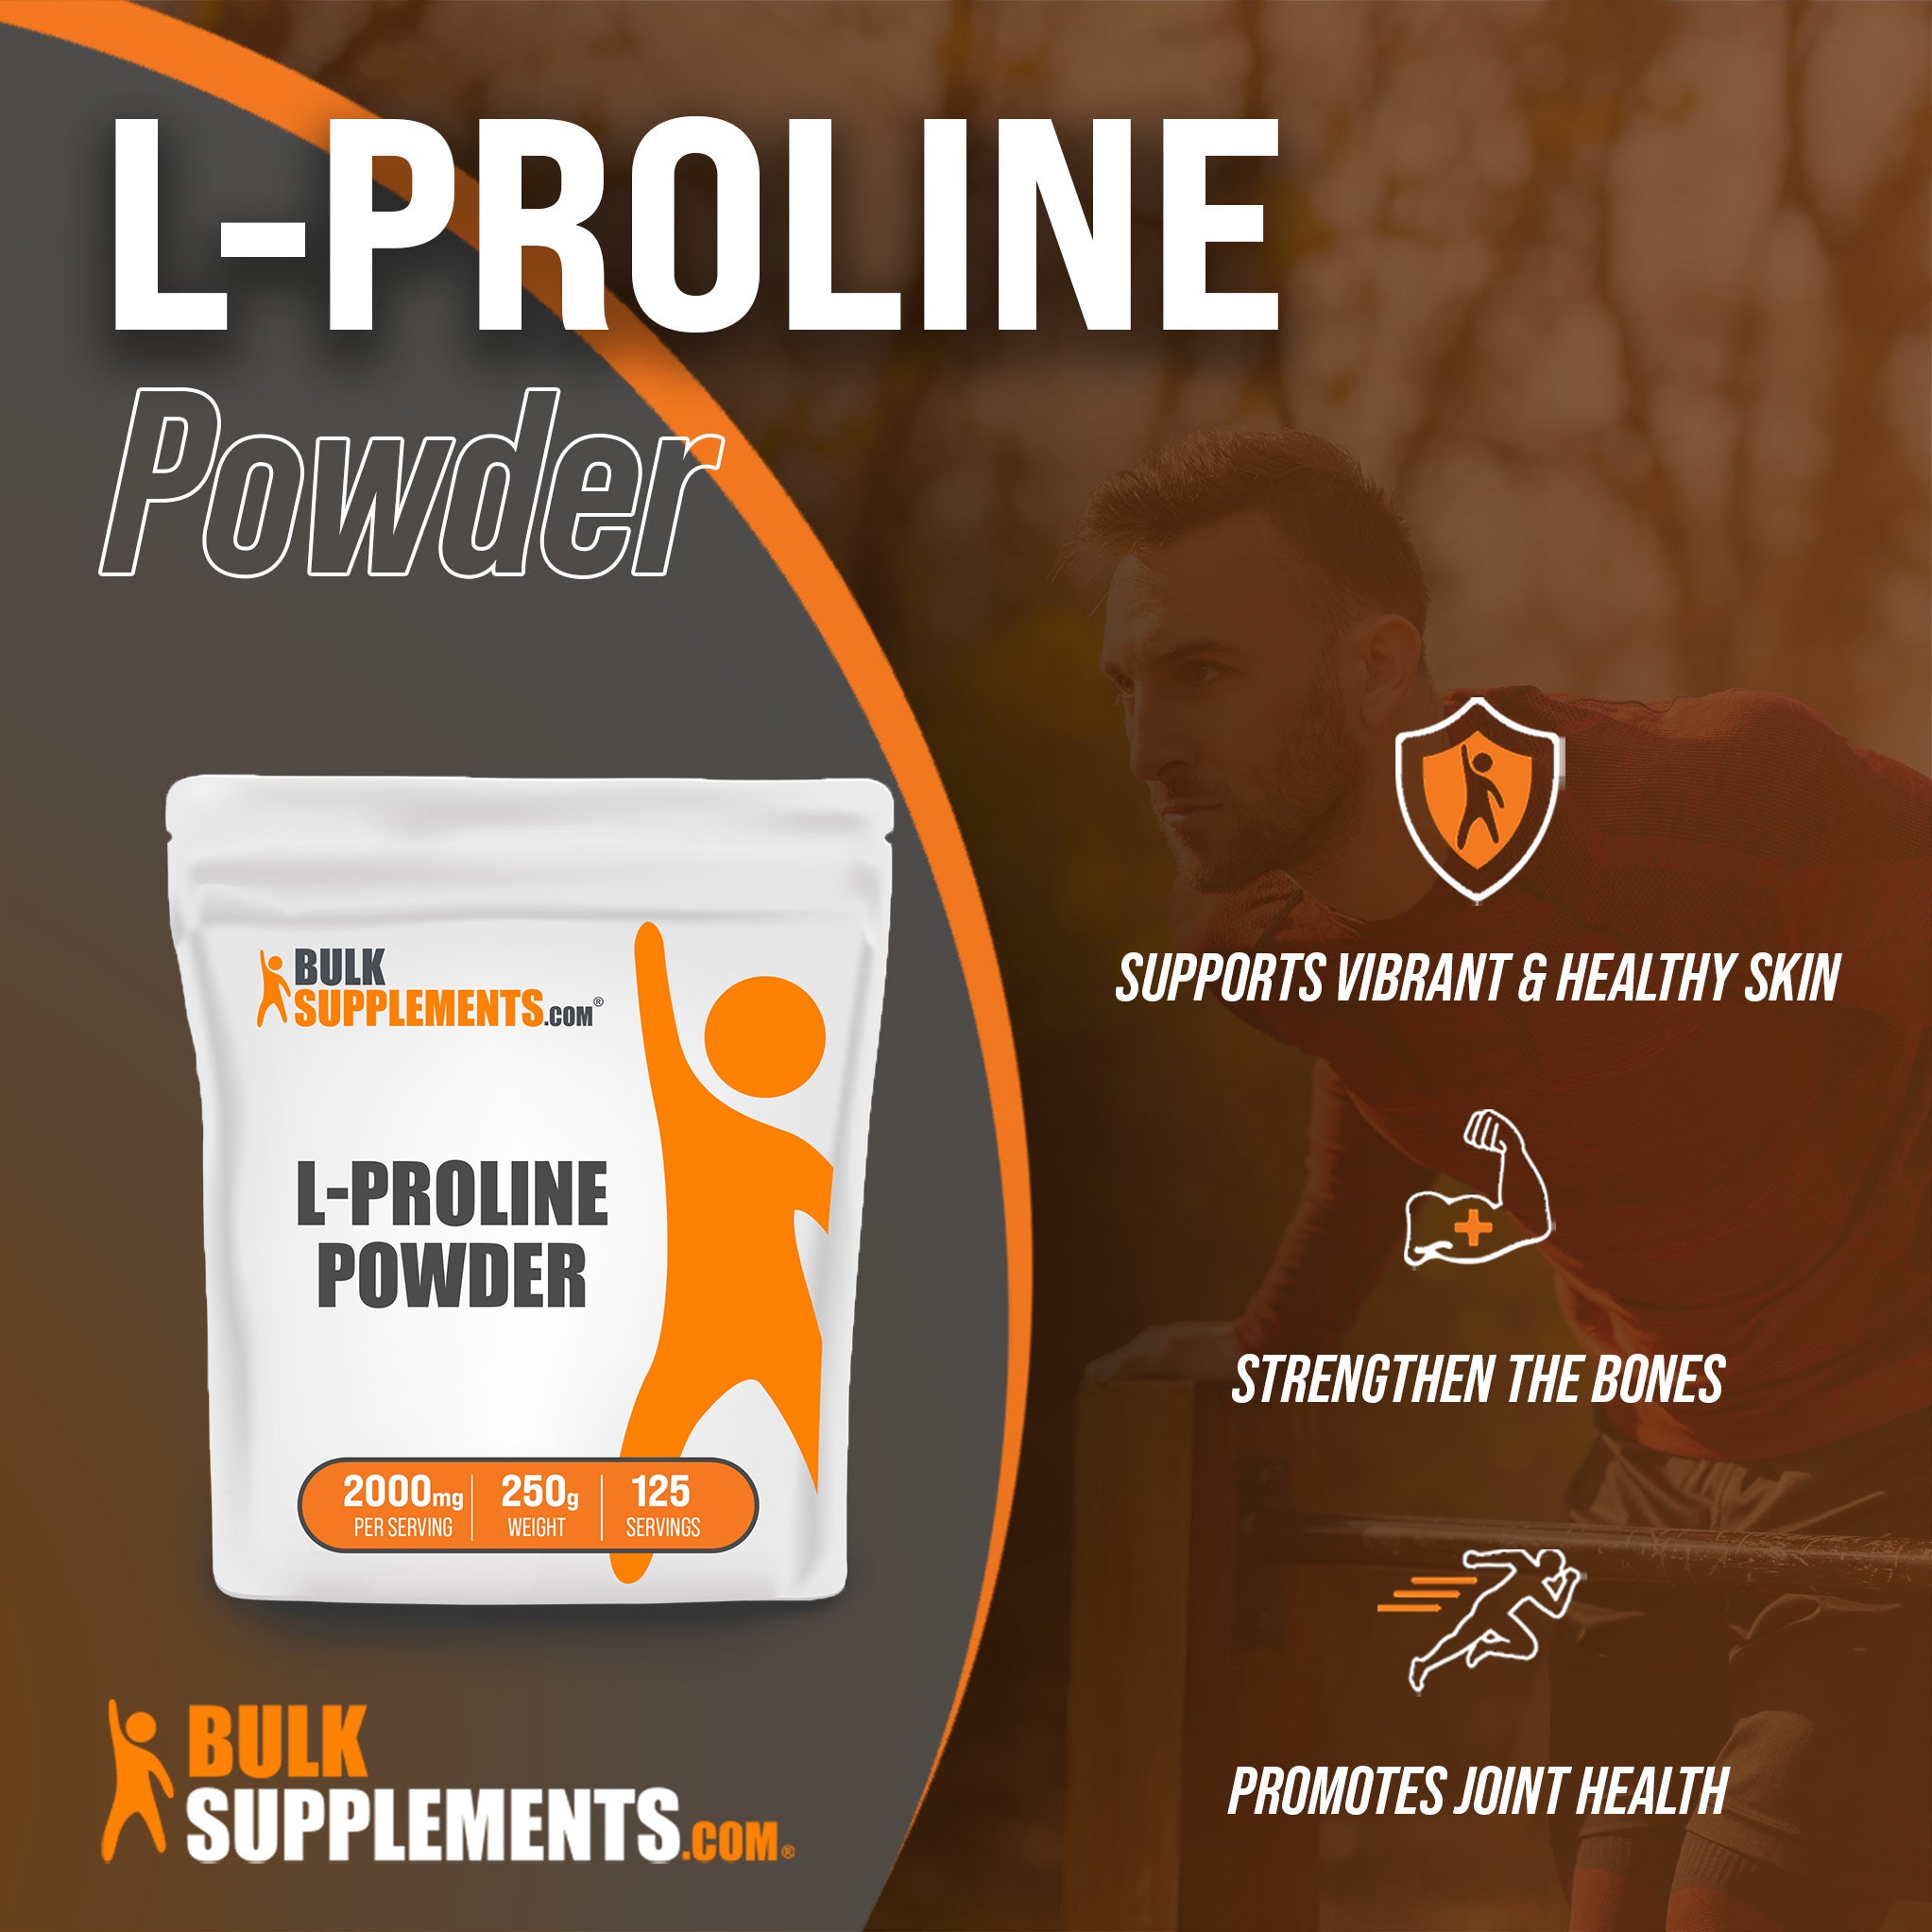 Benefits of L-Proline: supports vibrant and healthy skin, strengthen the bones, promotes joint health